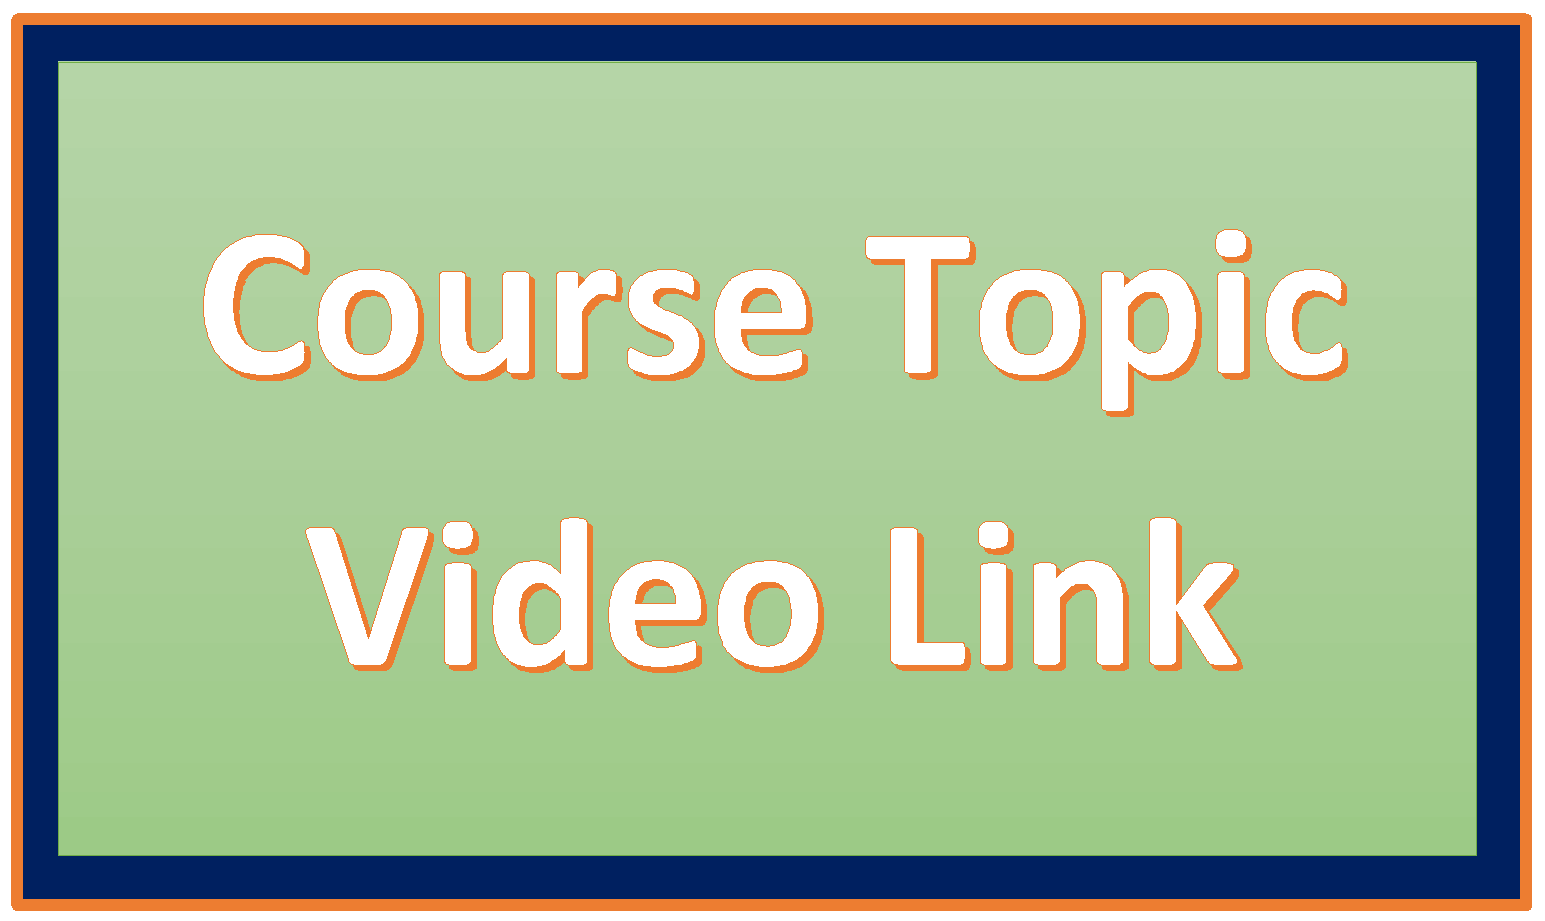 http://study.aisectonline.com/images/Distributor Salesman Course Topic Videos Link.png